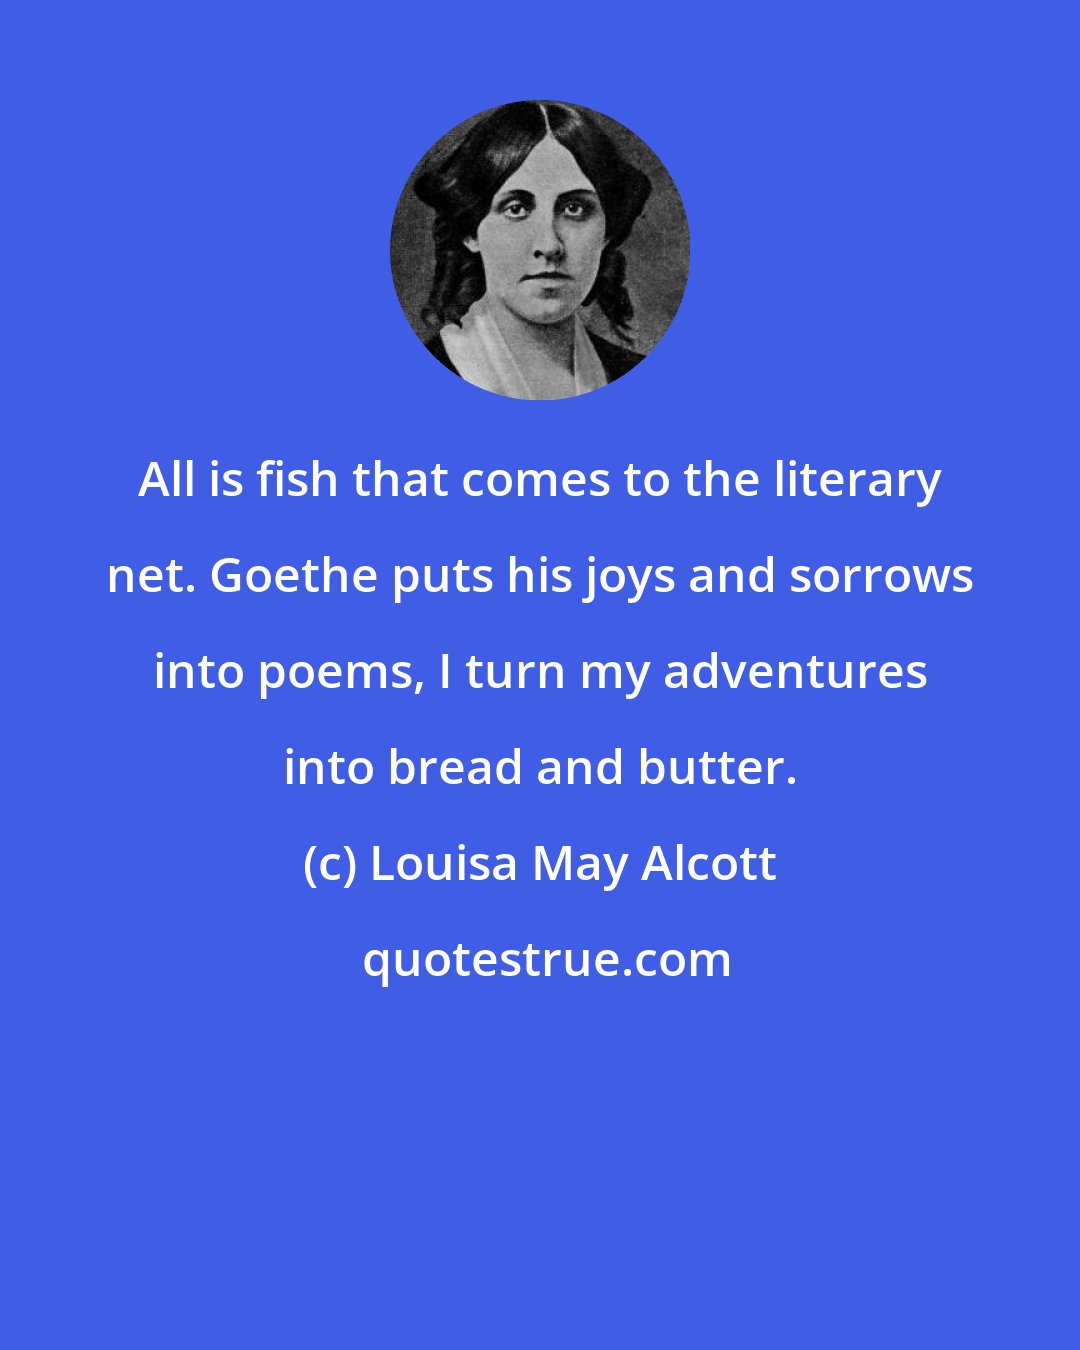 Louisa May Alcott: All is fish that comes to the literary net. Goethe puts his joys and sorrows into poems, I turn my adventures into bread and butter.